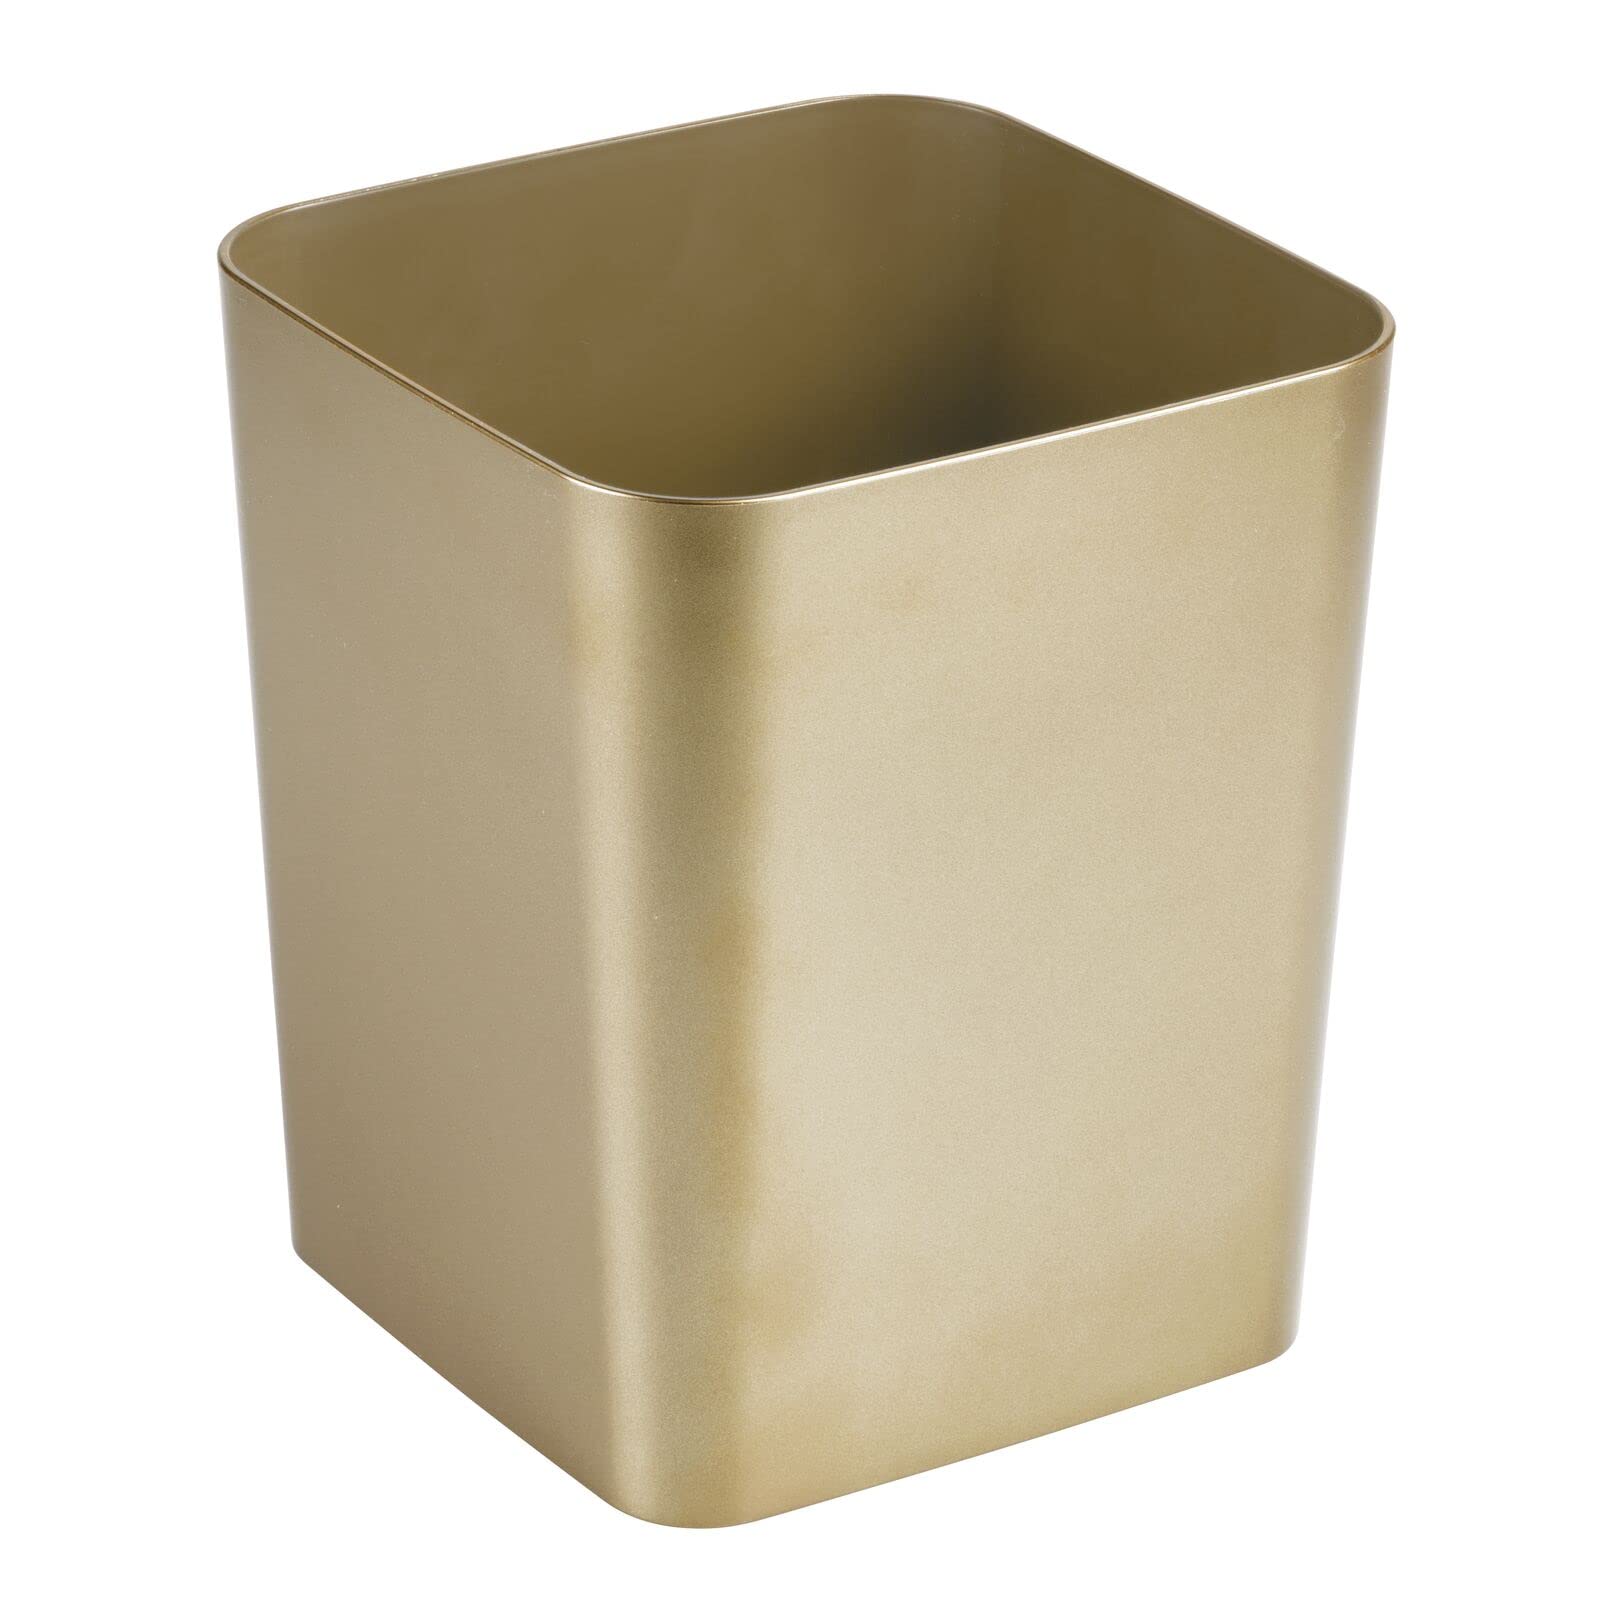 Book Cover mDesign Square Shatter-Resistant Plastic Small Trash Can Wastebasket, Garbage Container Bin for Bathrooms, Powder Rooms, Kitchens, Home Offices - Soft Brass Finish Soft Brass Square 10